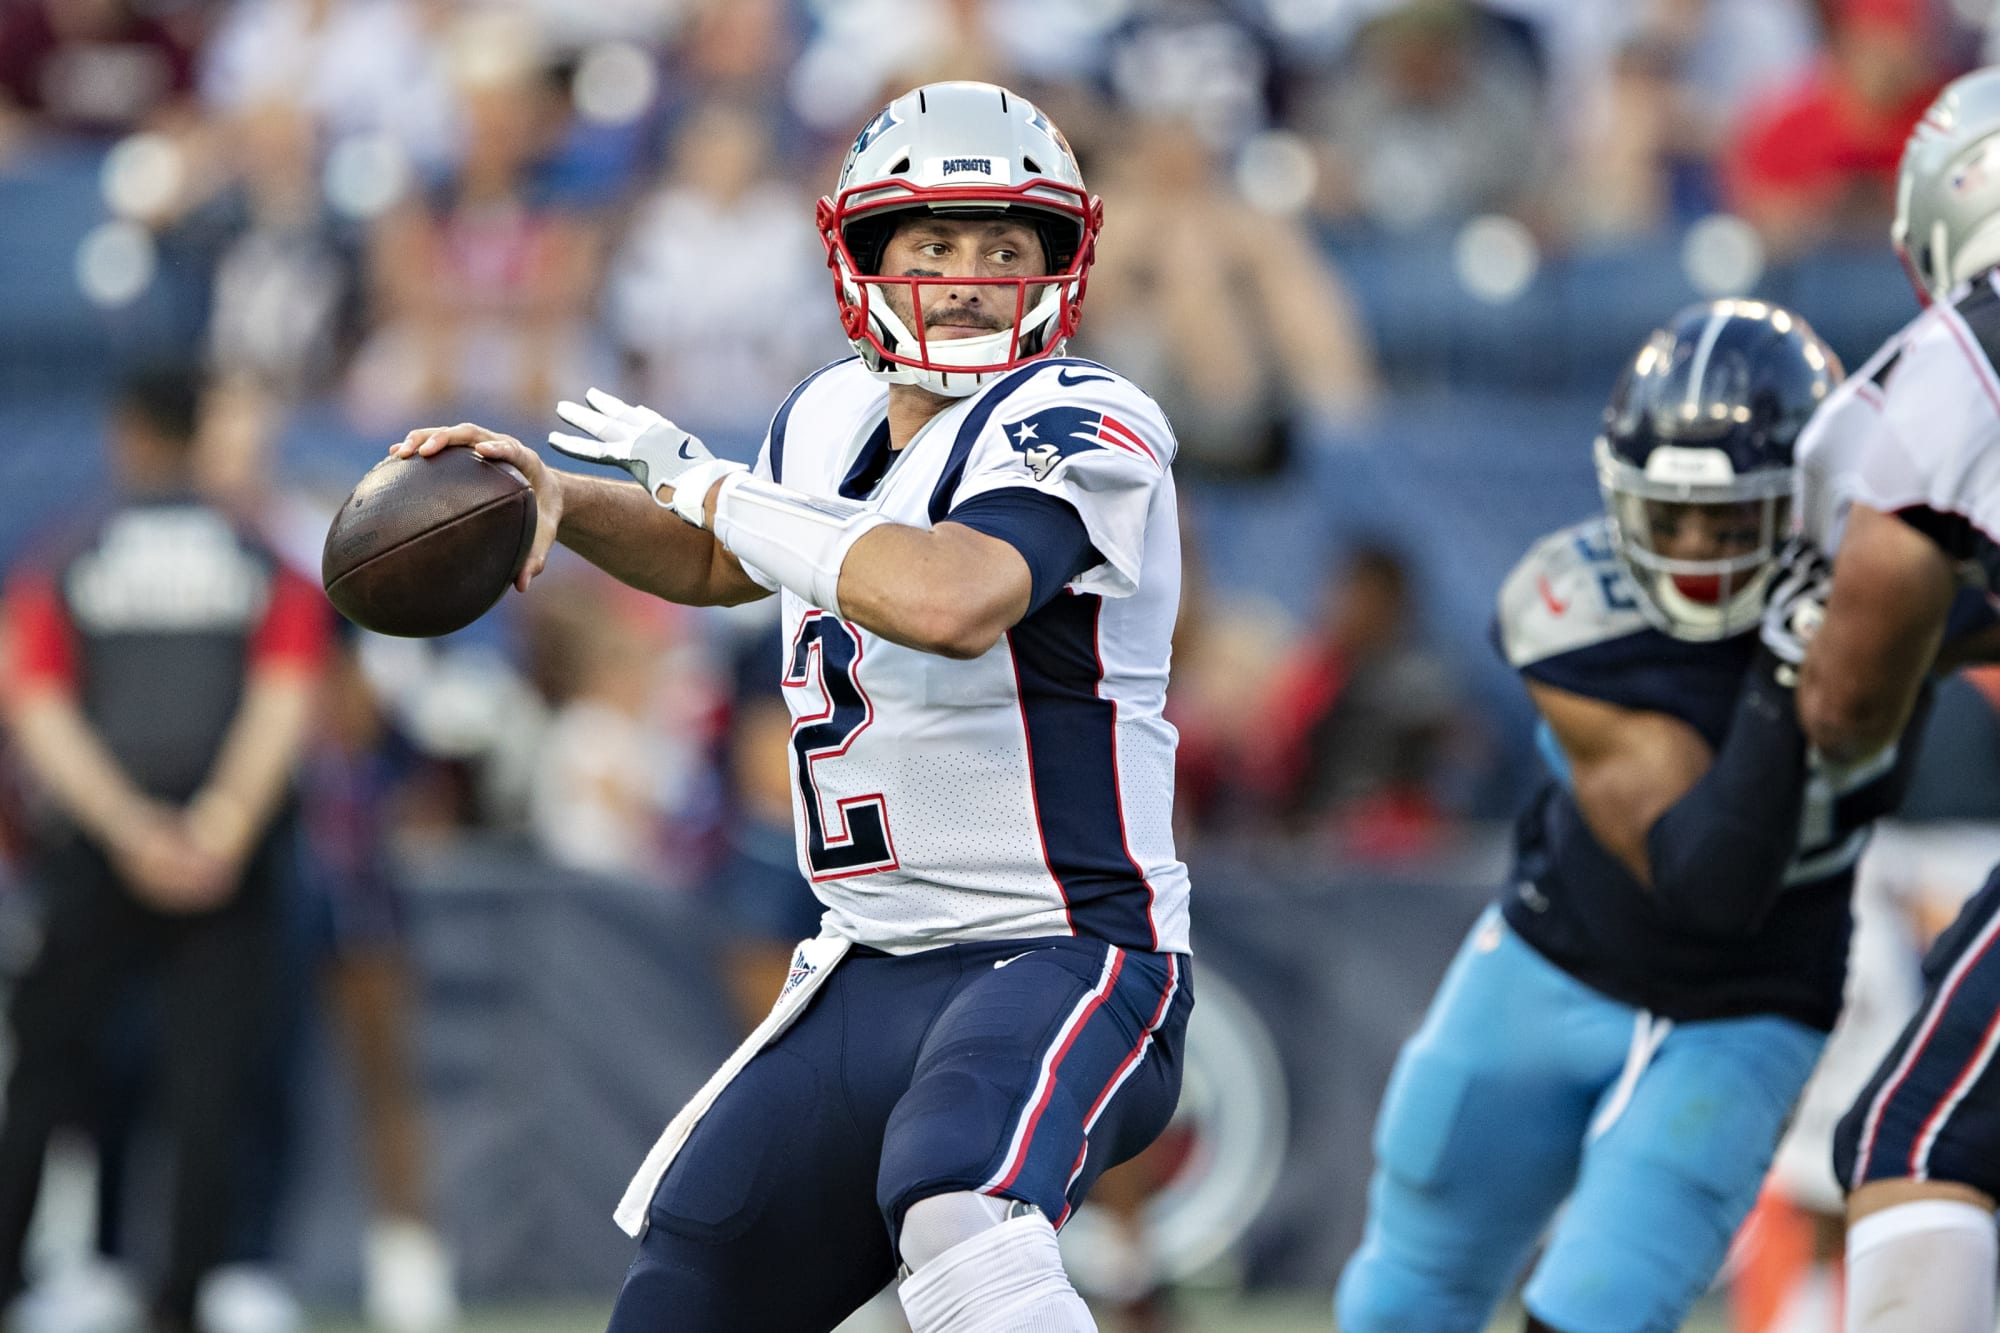 Could Brian Hoyer be the Patriots starting quarterback in 2020?